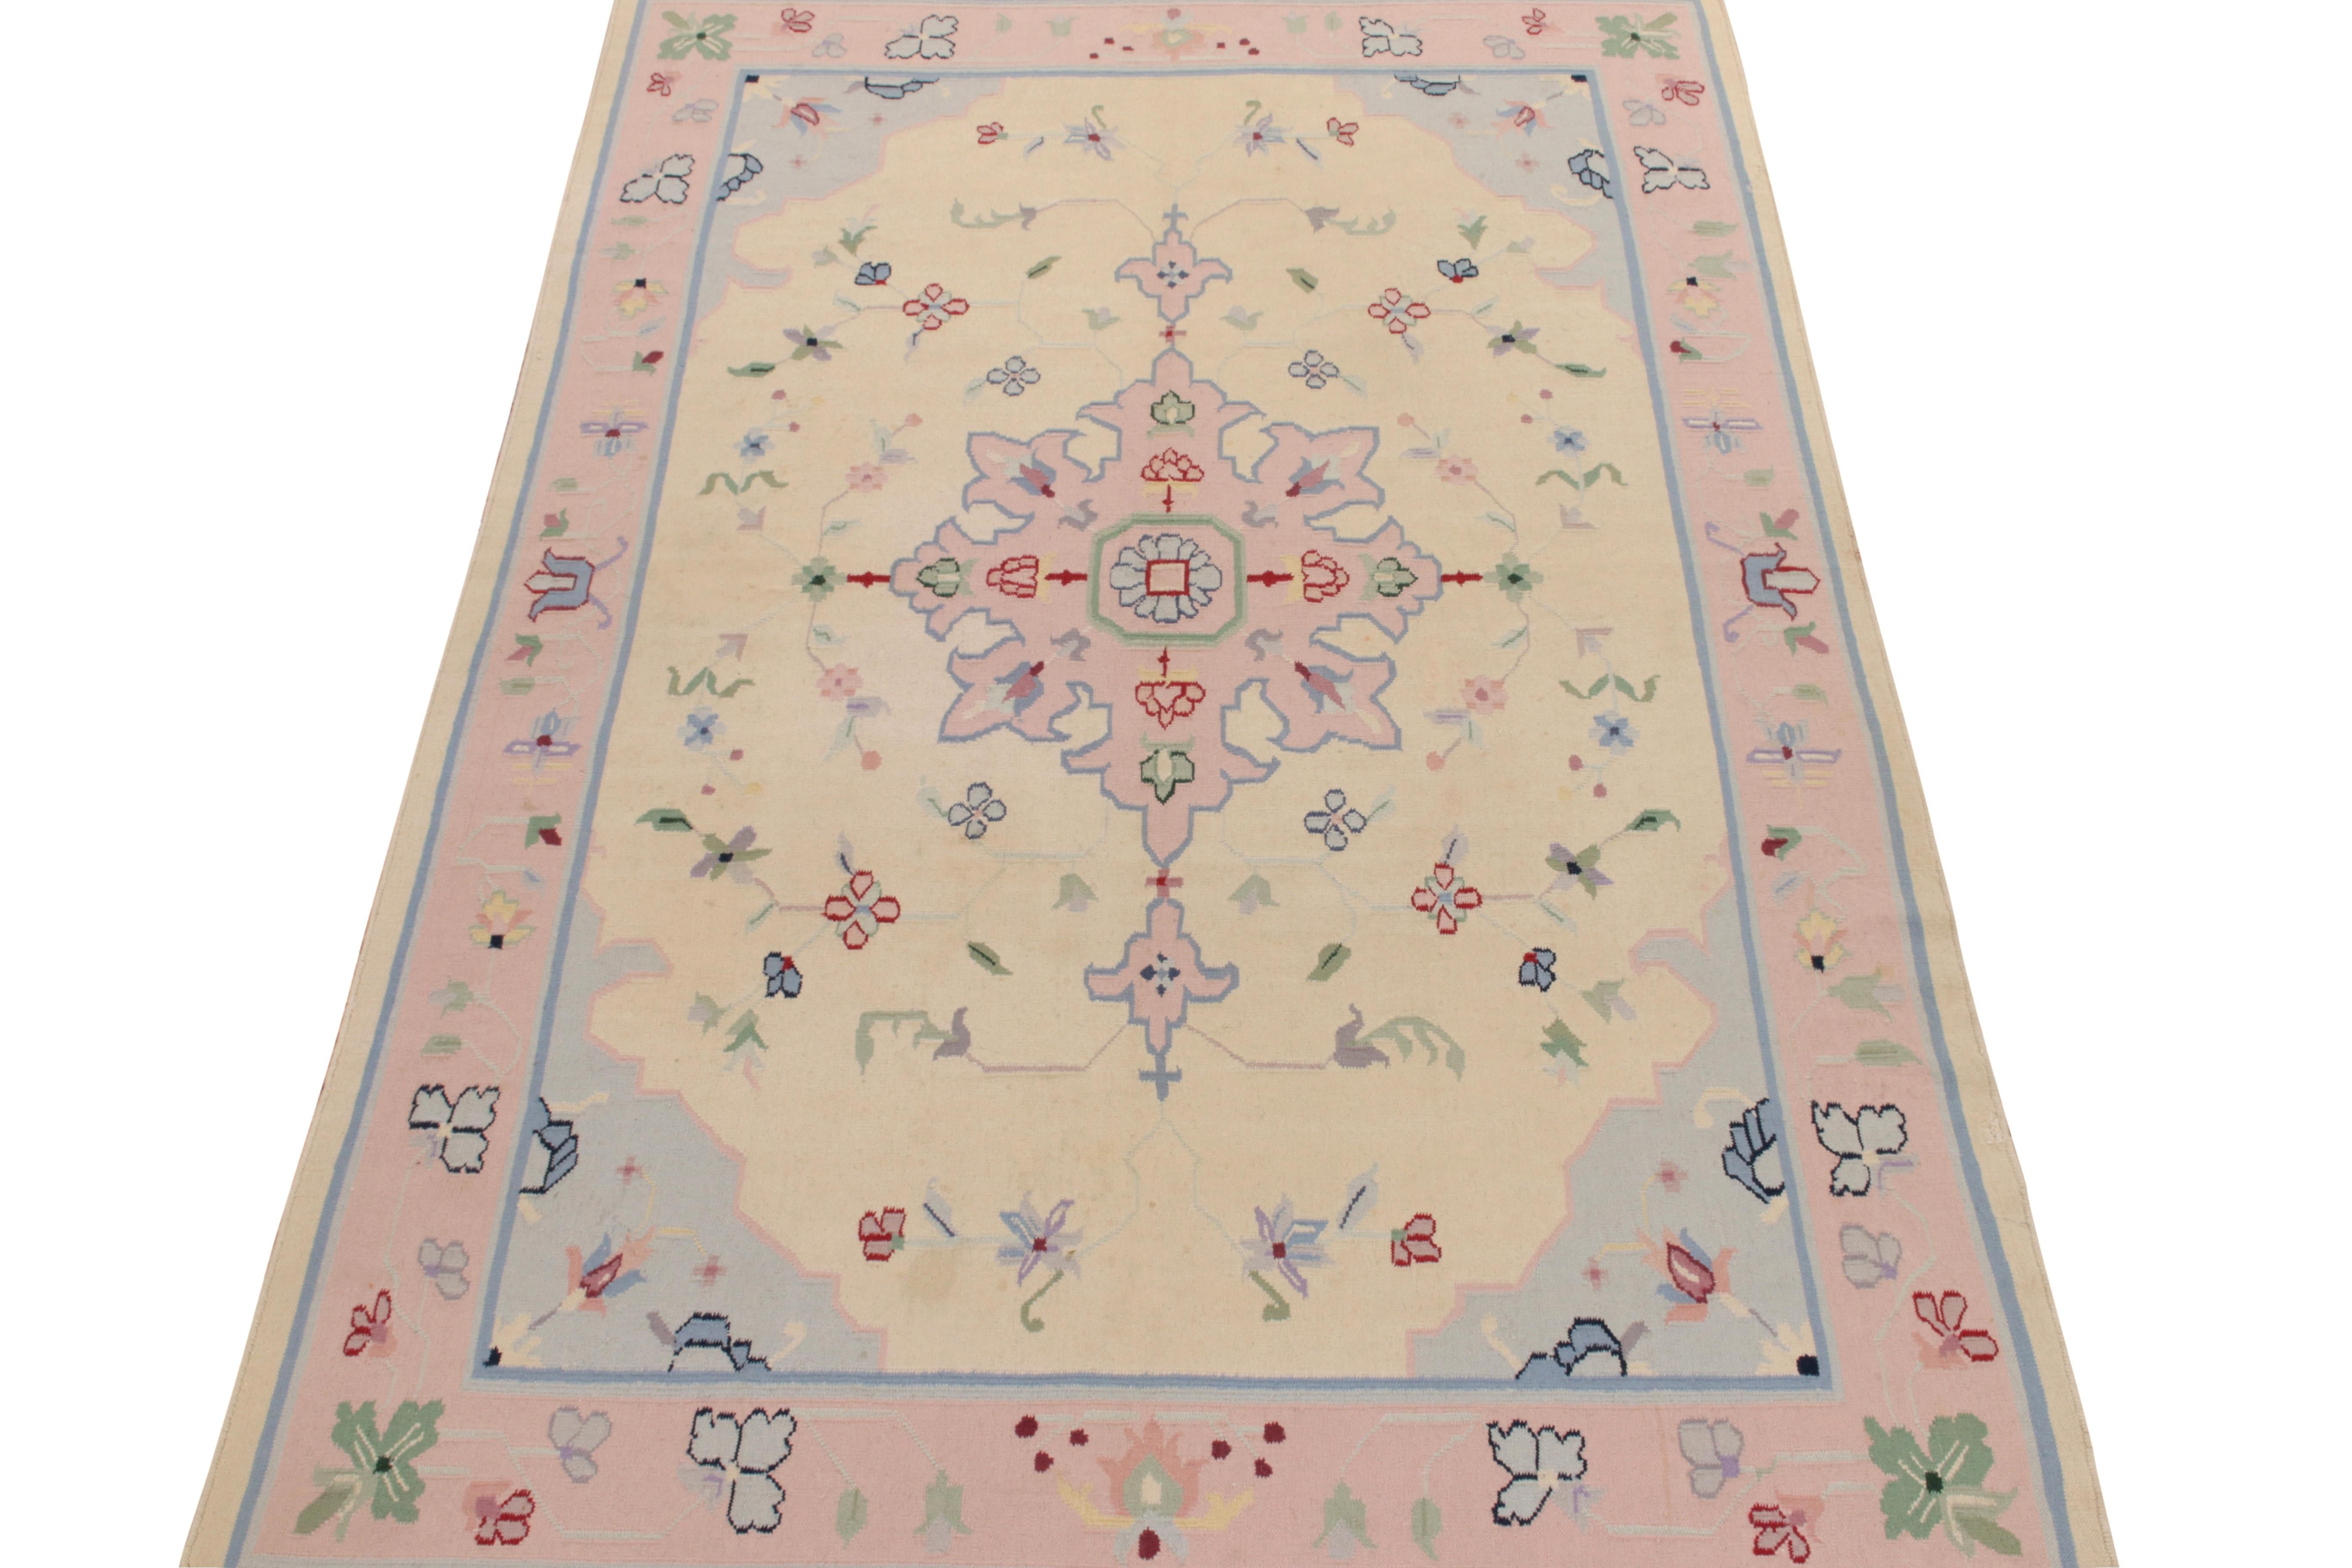 Handwoven in wool, a square 5x9 flatweave designed by one of the most modern designers in India—partner to Rug & Kilim. Acknowledged as a Dhurrie flatweave, this style features a sublime medallion in whimsical pink & pastel blue on a beige backdrop,